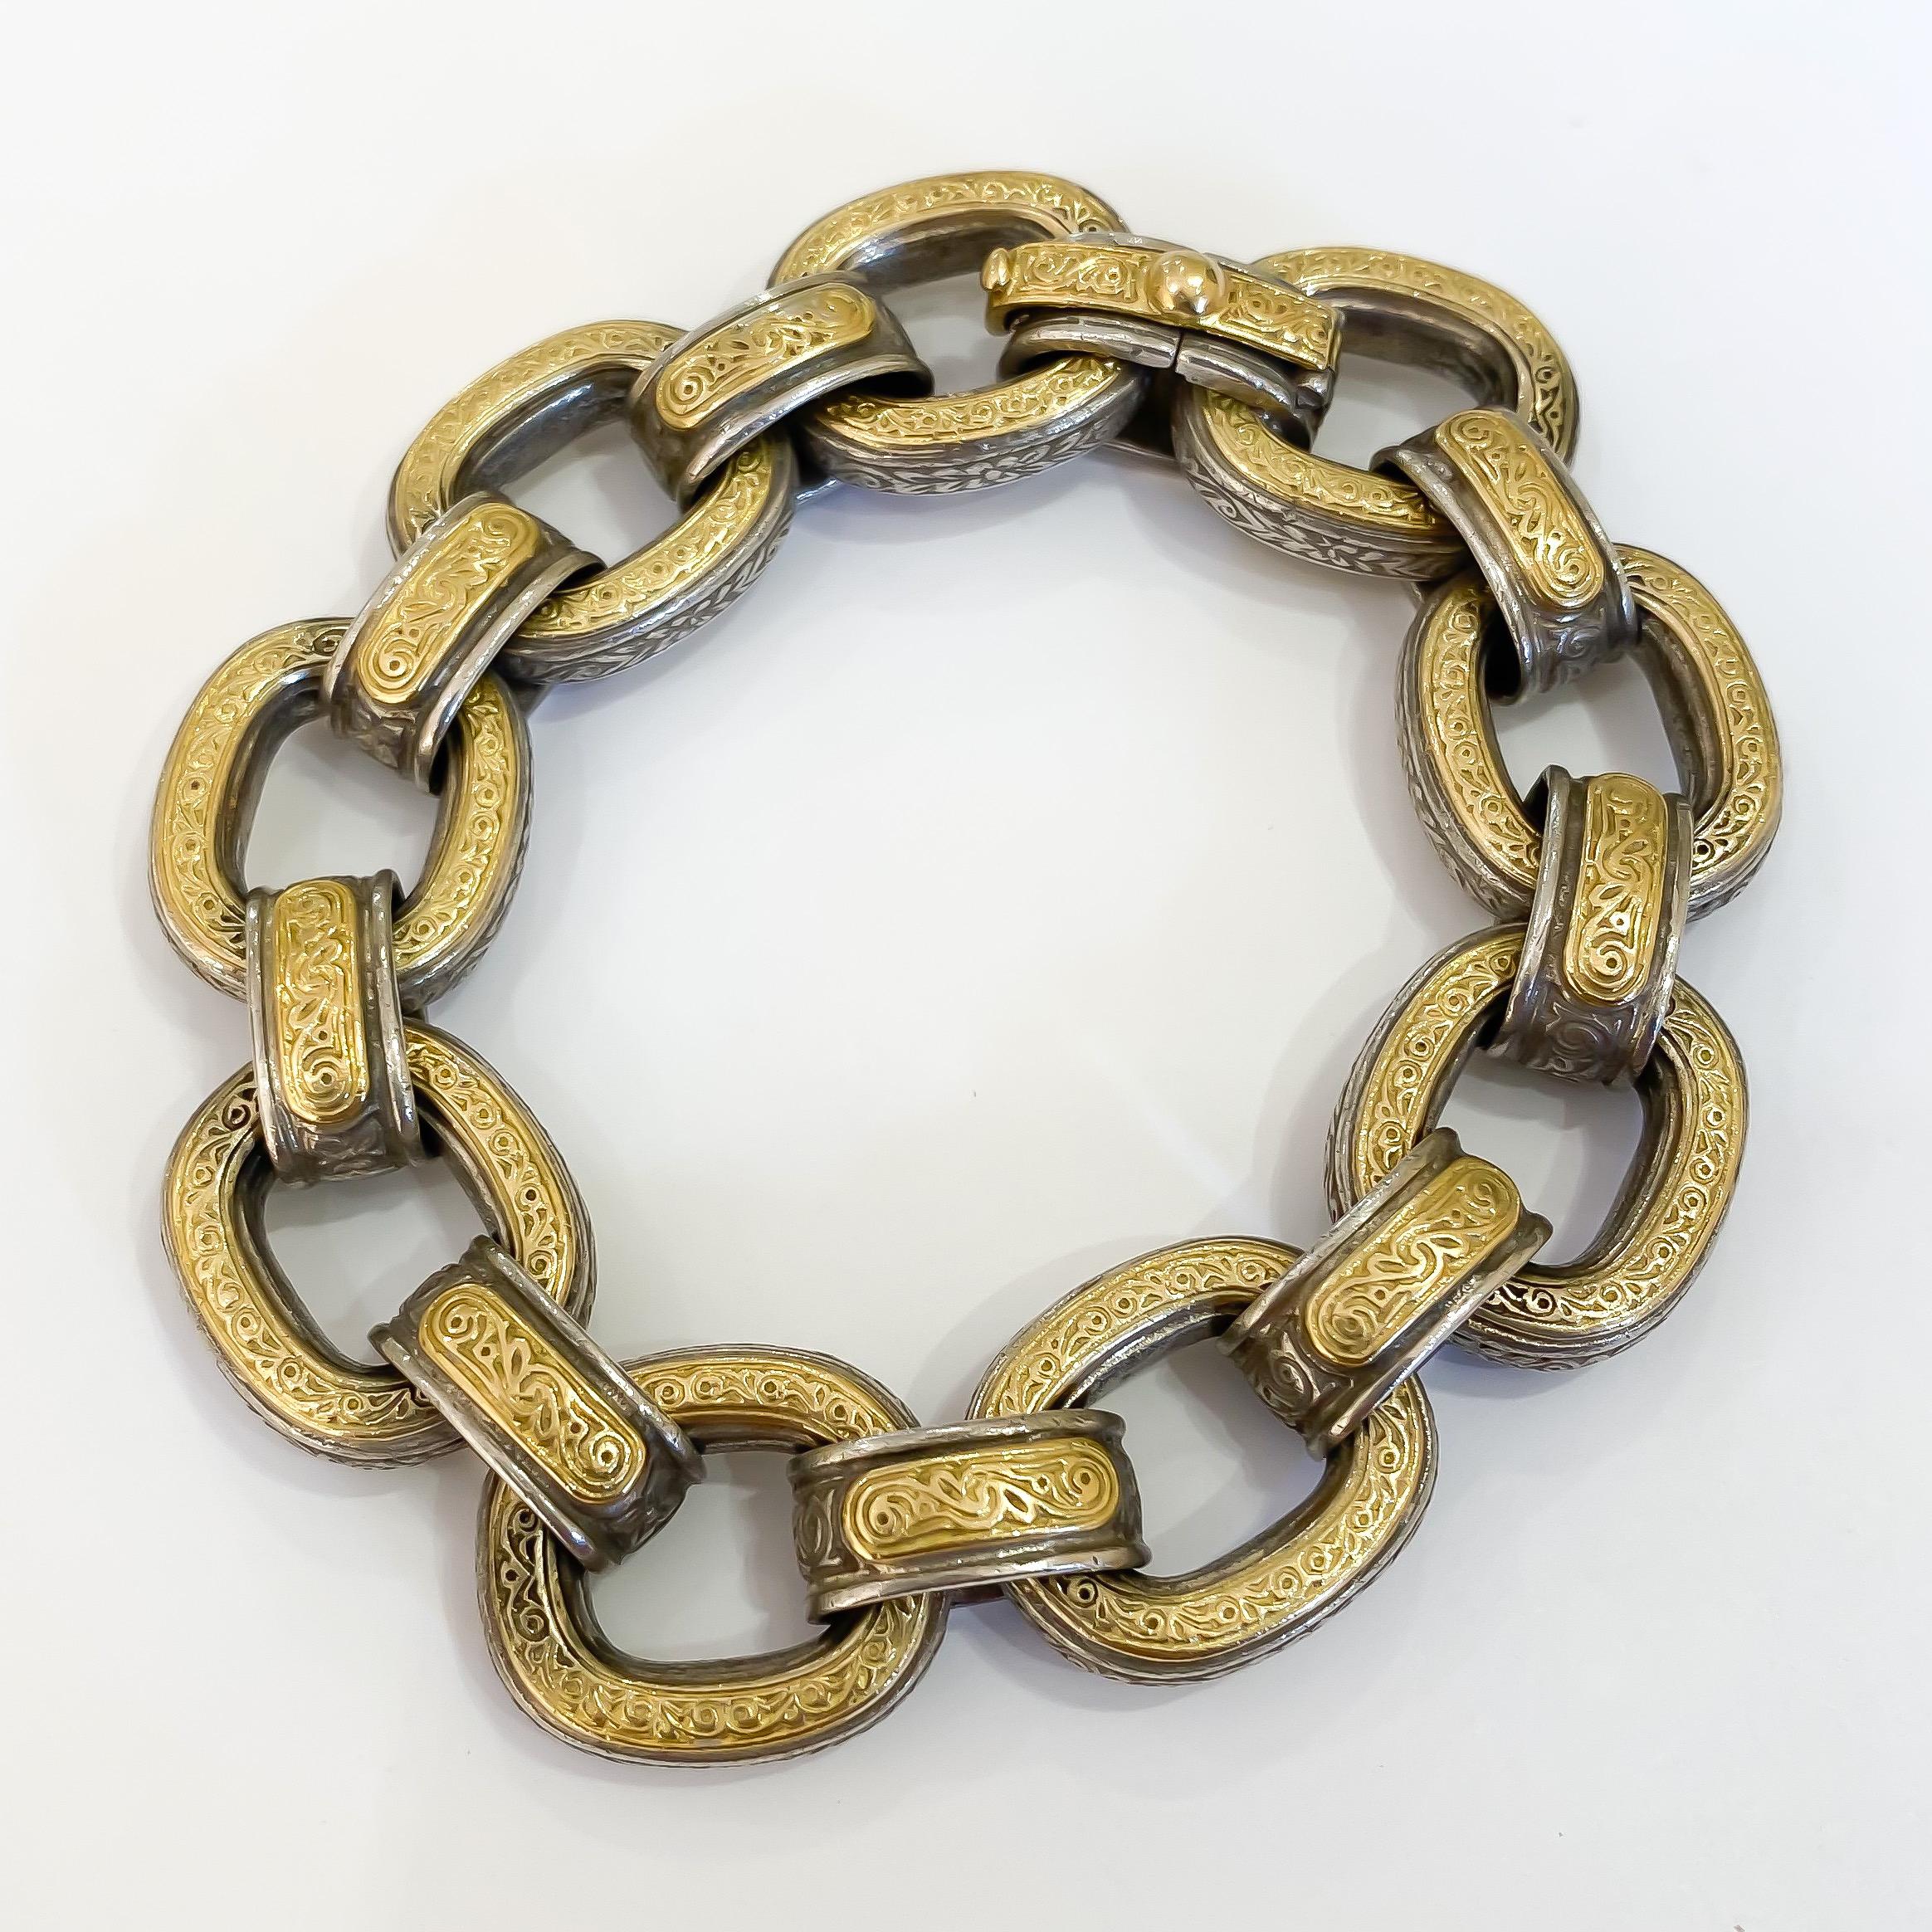 Estate lady's reversible engraved carved open link bracelet designed by Konstantino in sterling silver and 18 karat yellow gold. The open hollow links measure 16mm with an oval fold over clasp. Both sides and profile are elegantly engraved to make